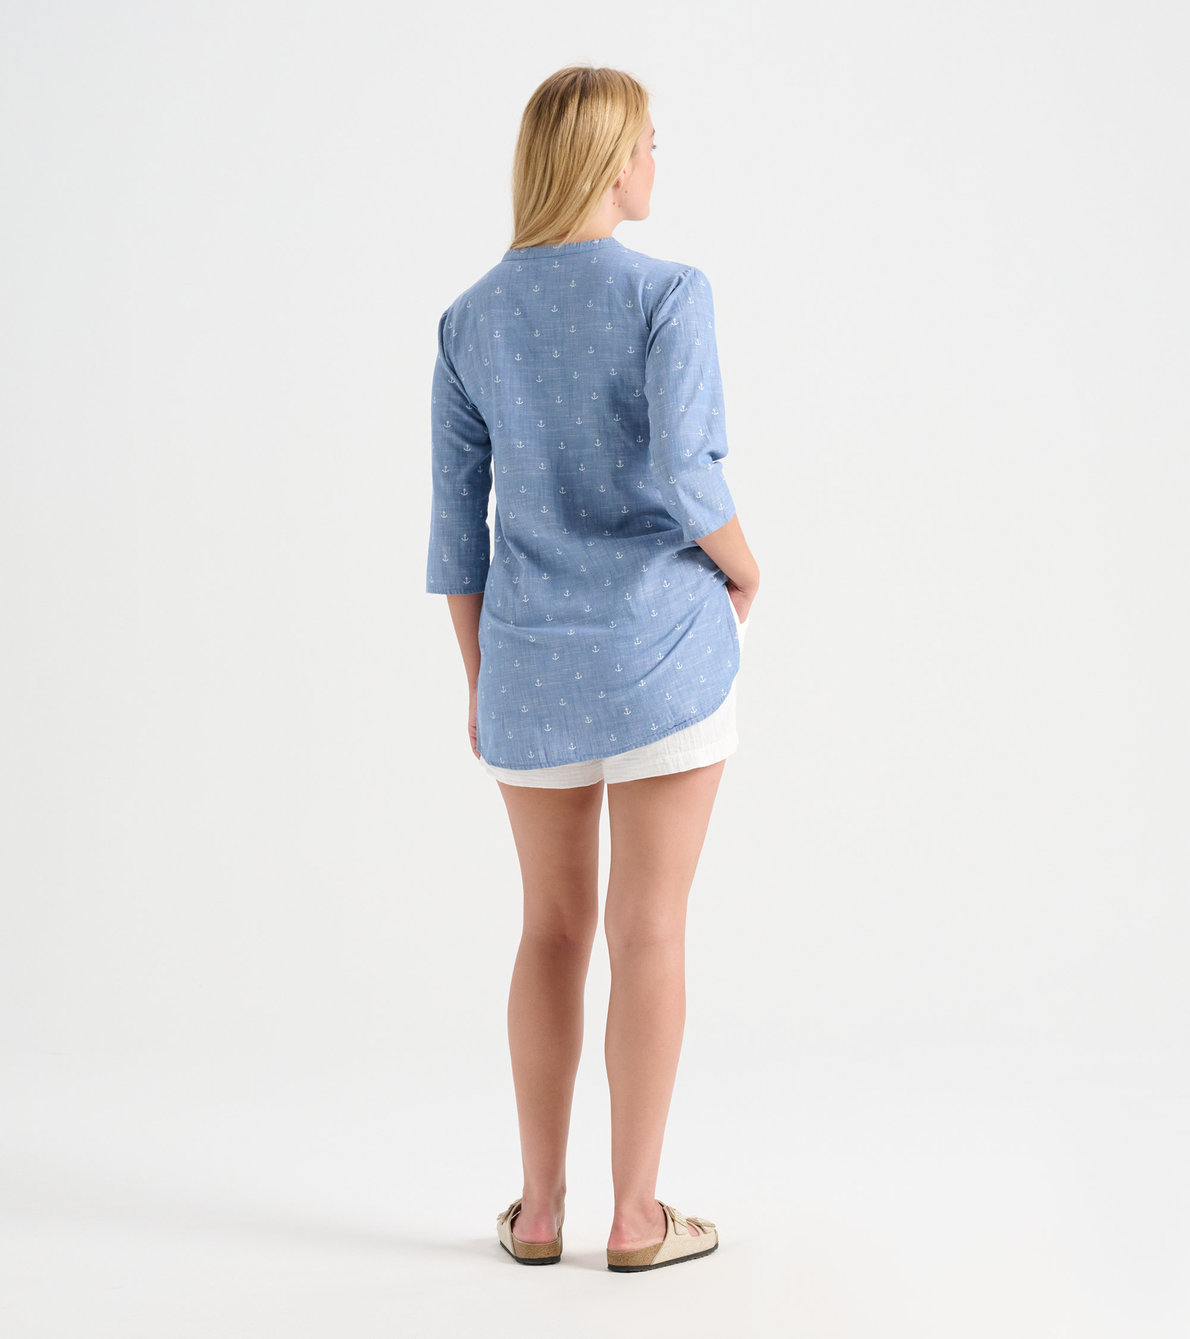 View larger image of Women's Anchors Delray Beach Tunic